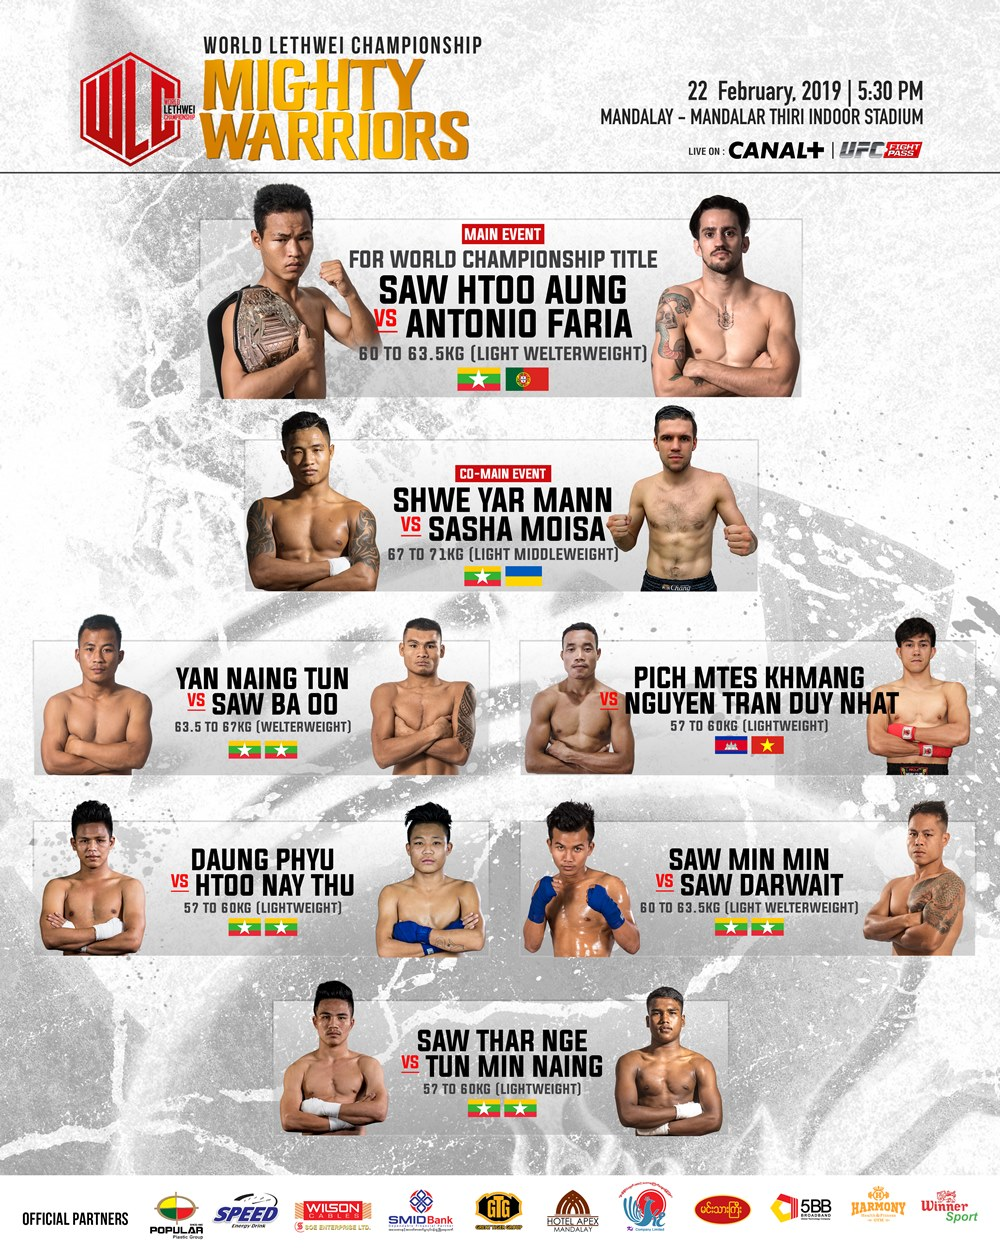 World Lethwei Championship to hold Mighty Warriors on UFC Fight Pass